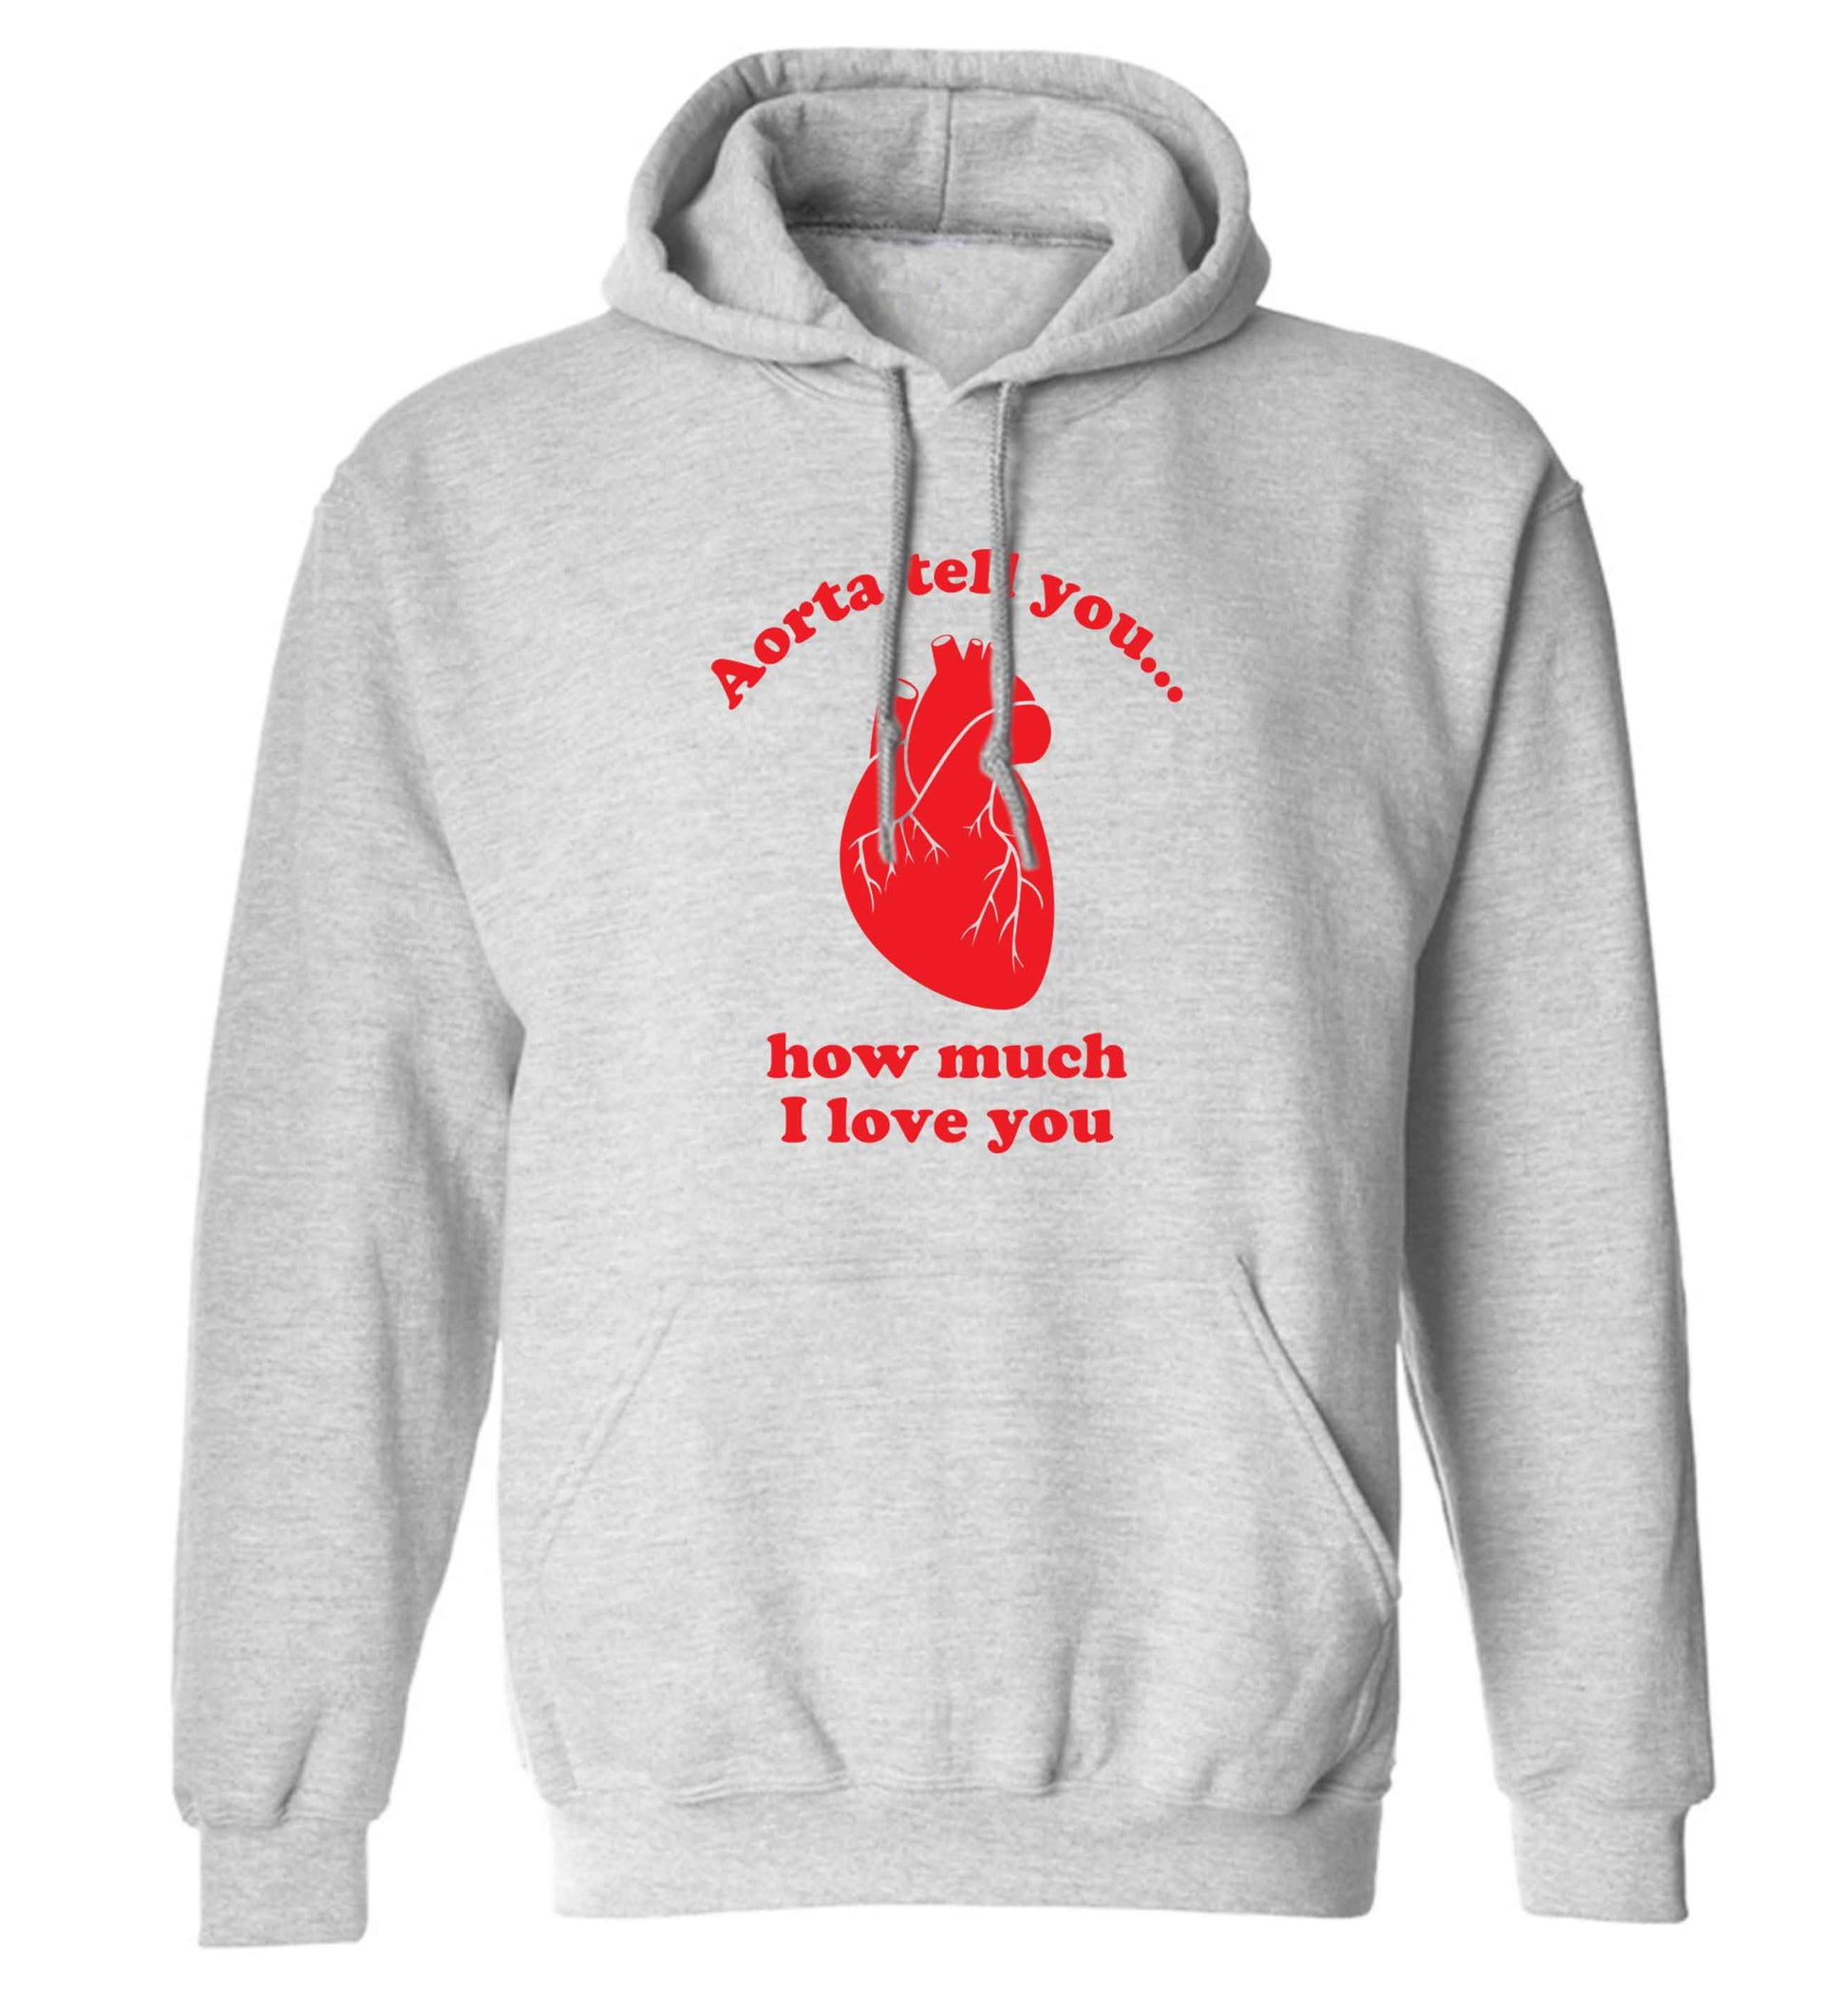 Aorta tell you how much I love you adults unisex grey hoodie 2XL